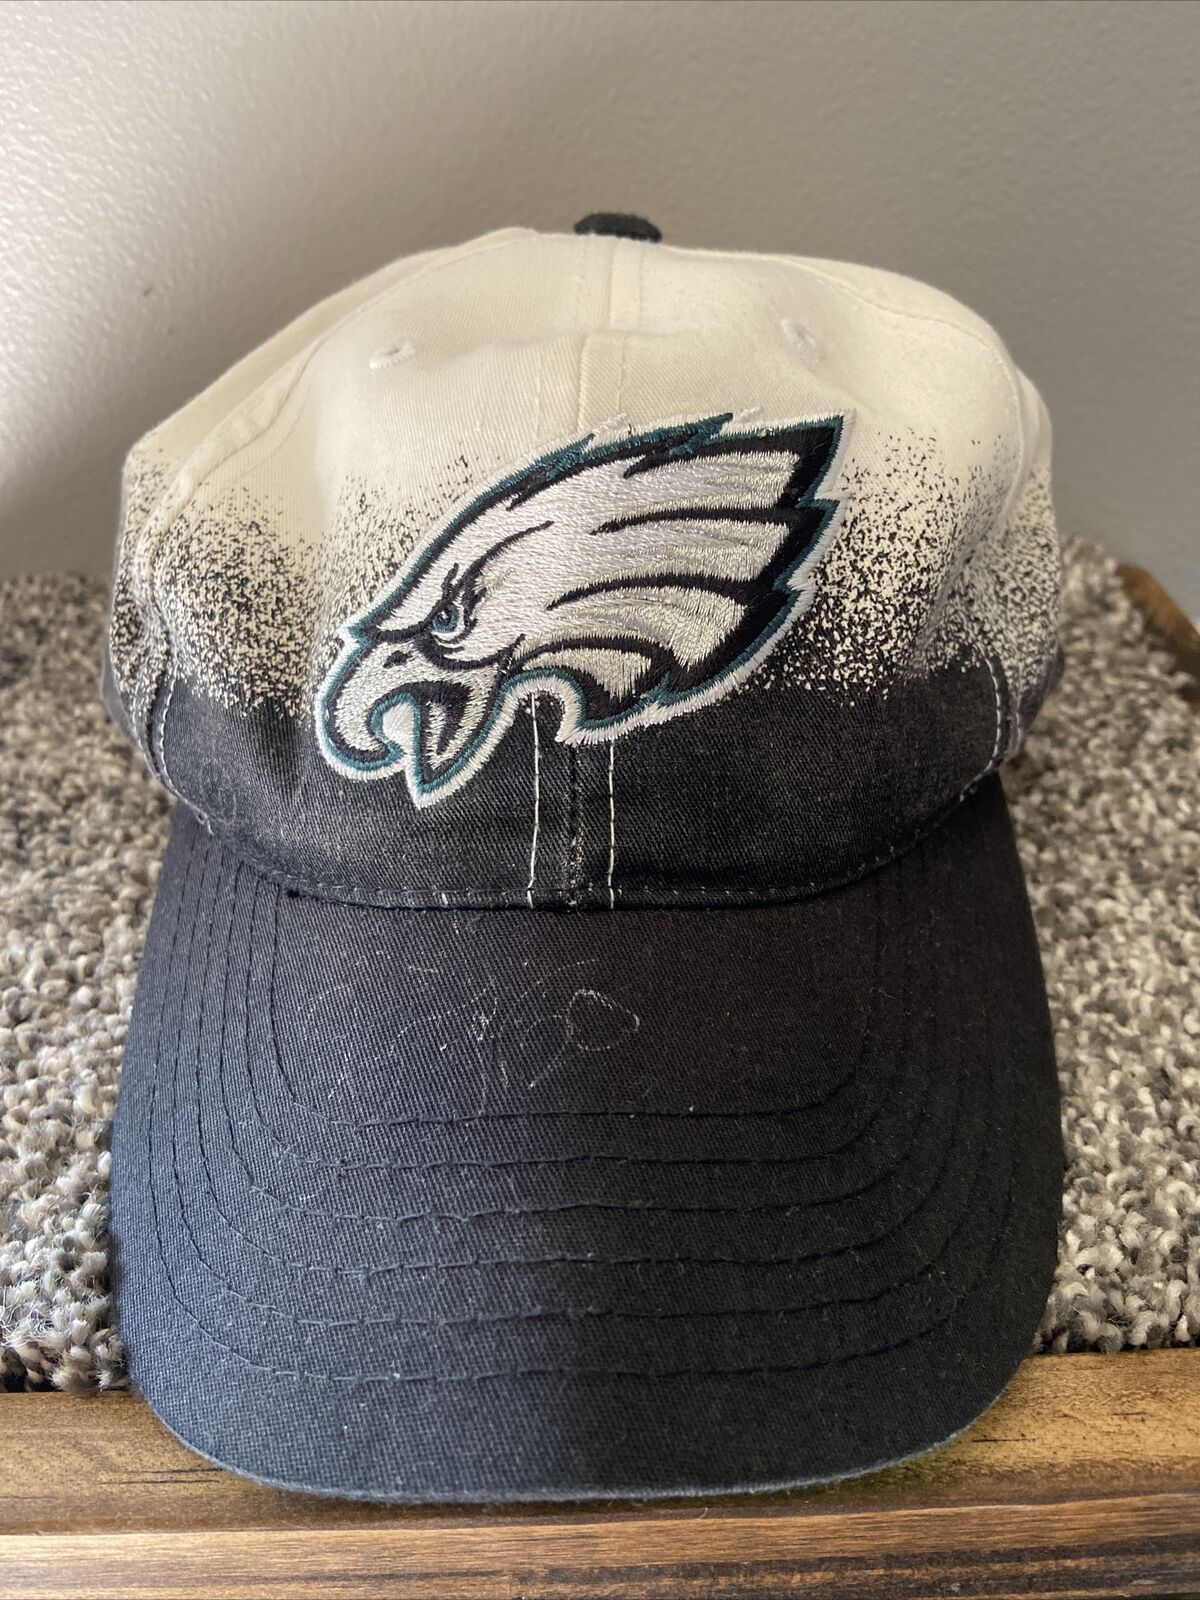 Brian Dawkins Autographed Youth Eagles Hat